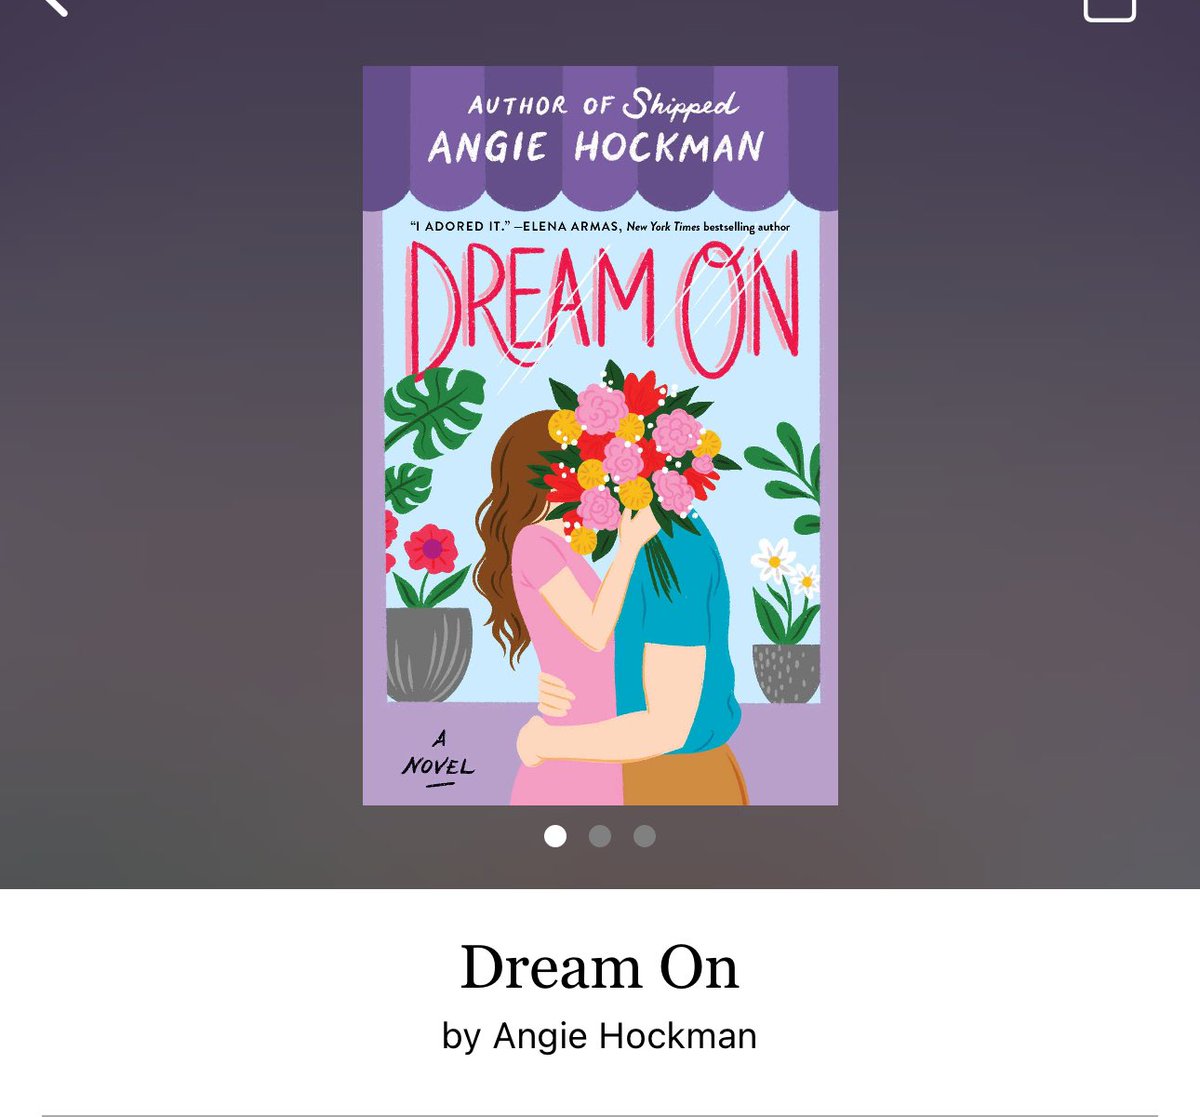 Dream On by Angie Hockman 

#DreamOn by #AngieHockman #6124 #32chapters #352pages #273of400 #11houraudiobook #Audiobook #34for9 #CassAndDevin #march2024 #clearingoffreadingshelves #whatsnext #readitquick